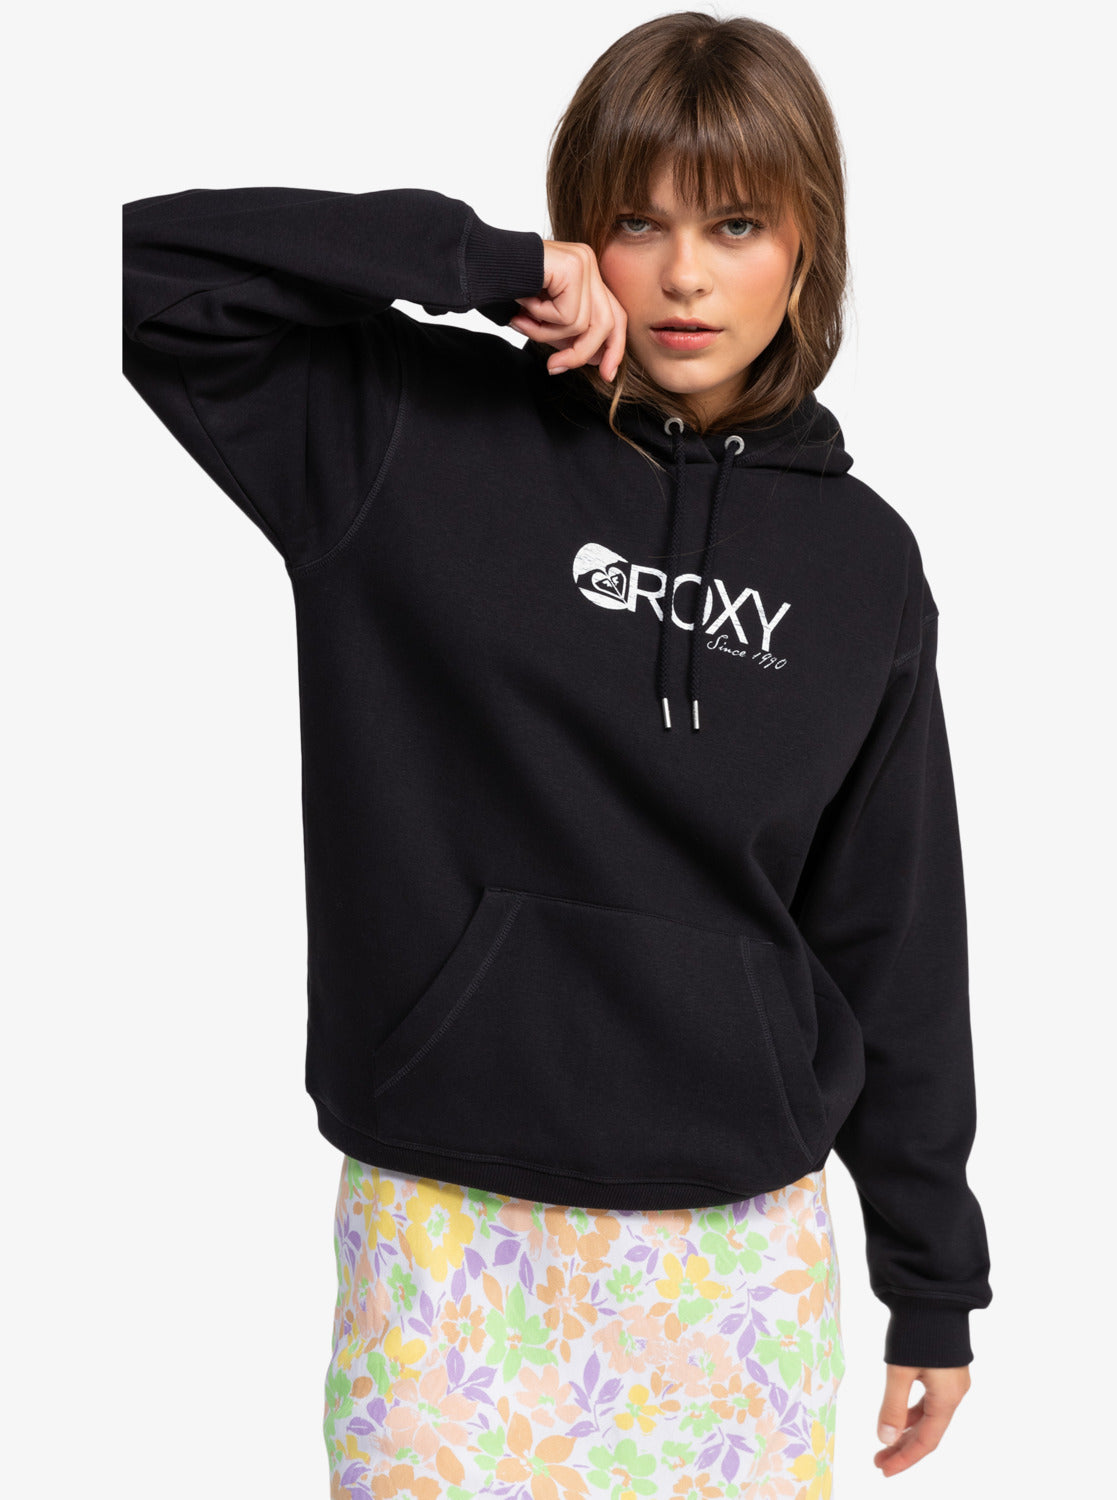 Roxy Surf Stoked Hoodie Brushed B - Anthracite - Star Surf + Skate